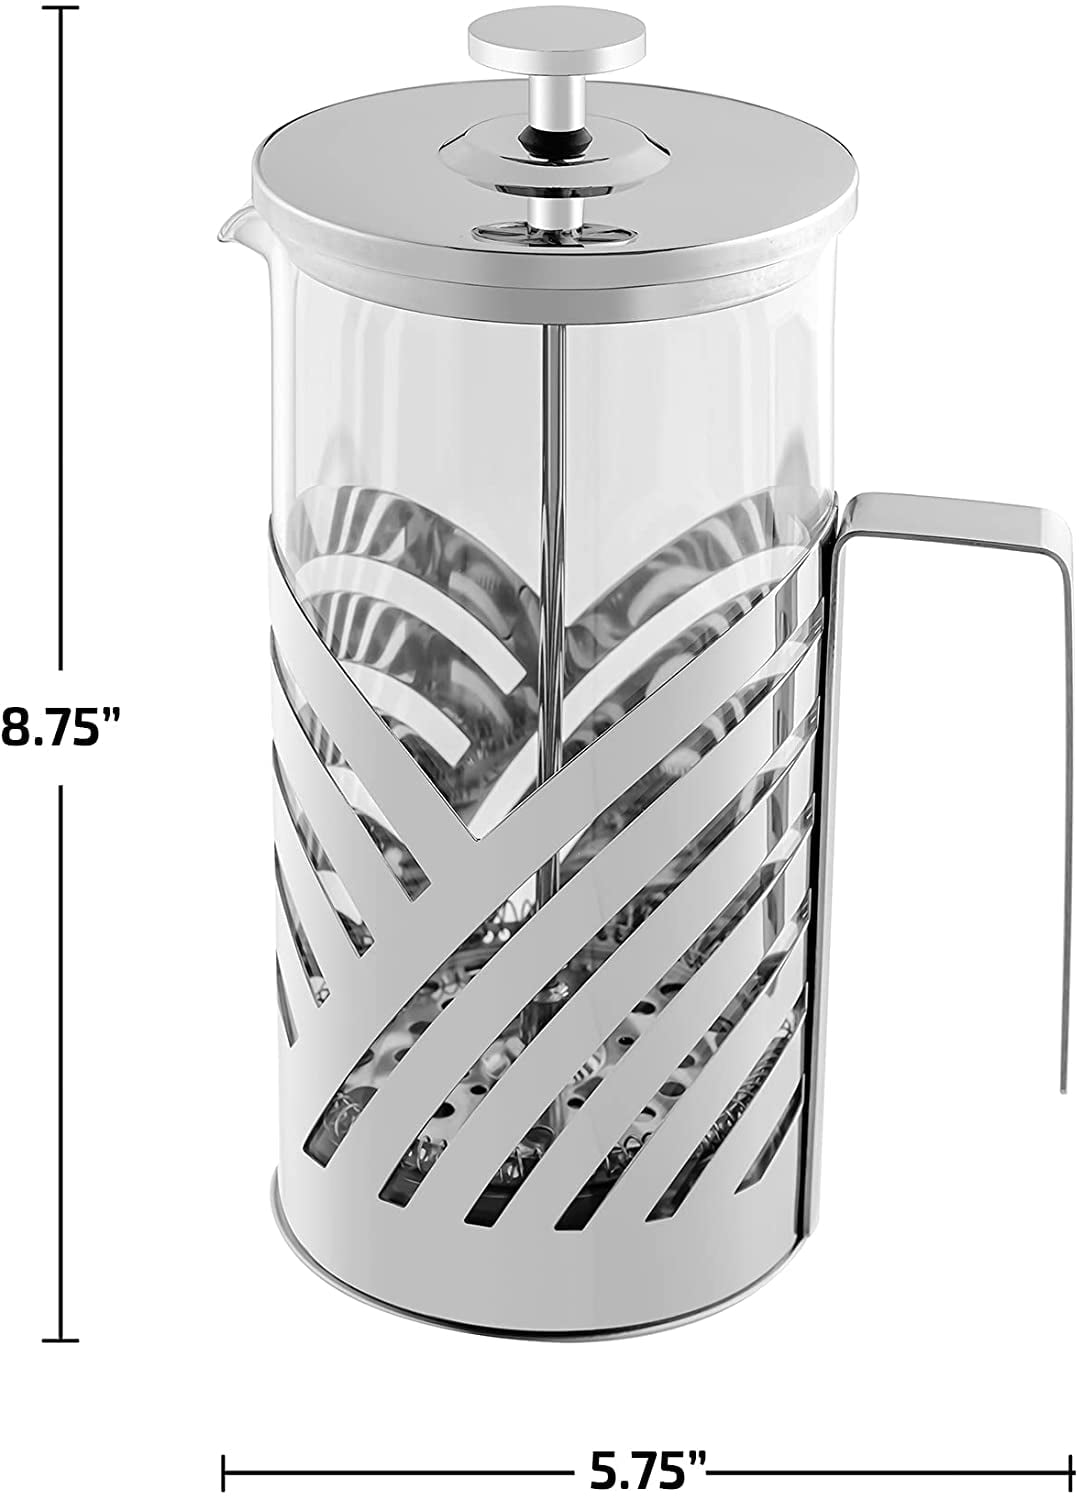 Ovente French Press Cafetière Coffee and Tea Maker, 20-34 oz, (FSF Series)